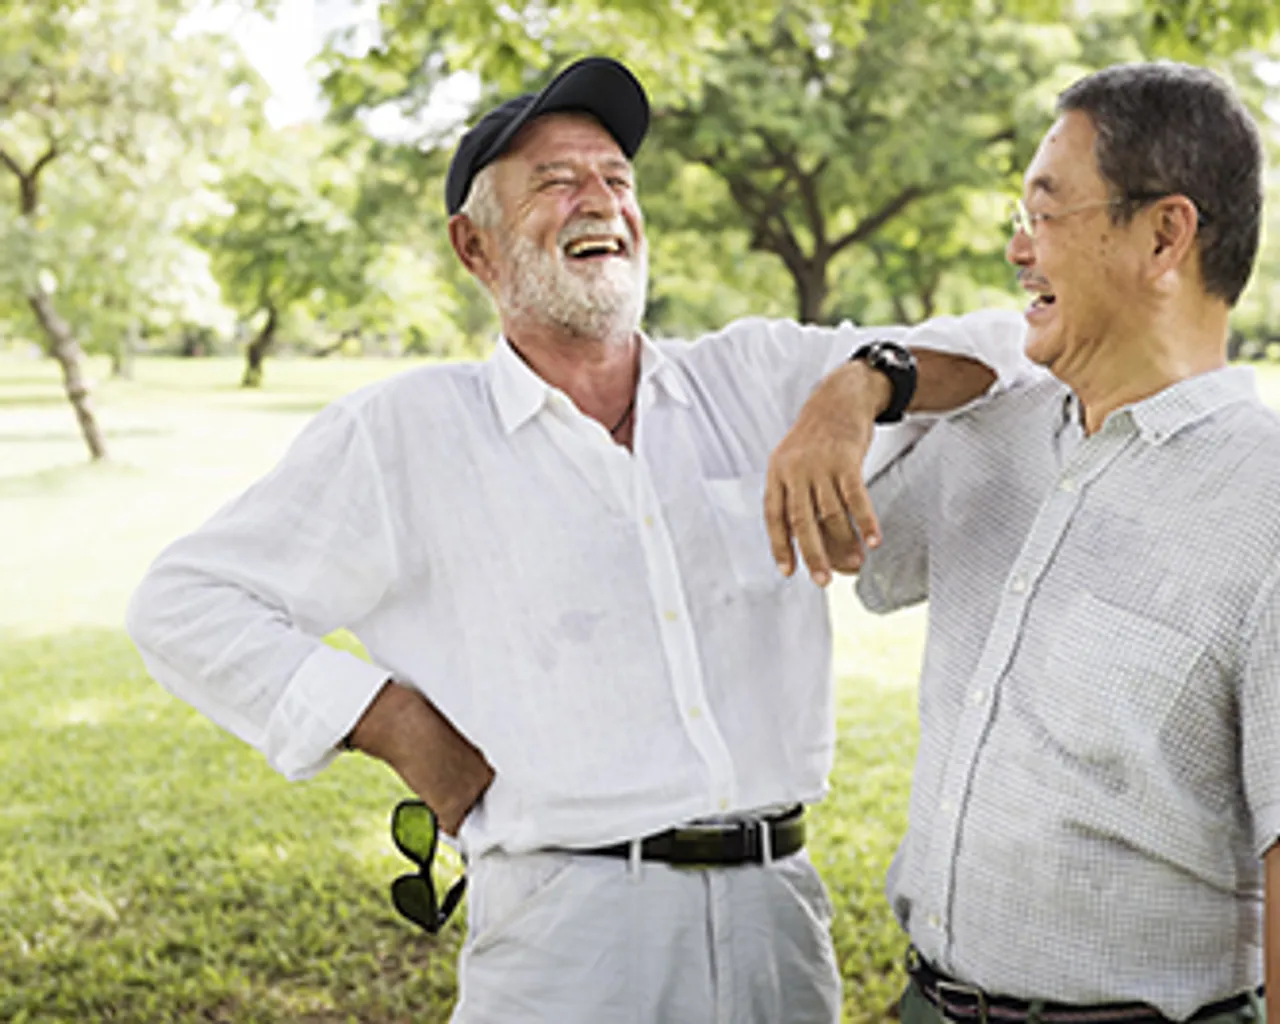 Two older friends laughing in the park